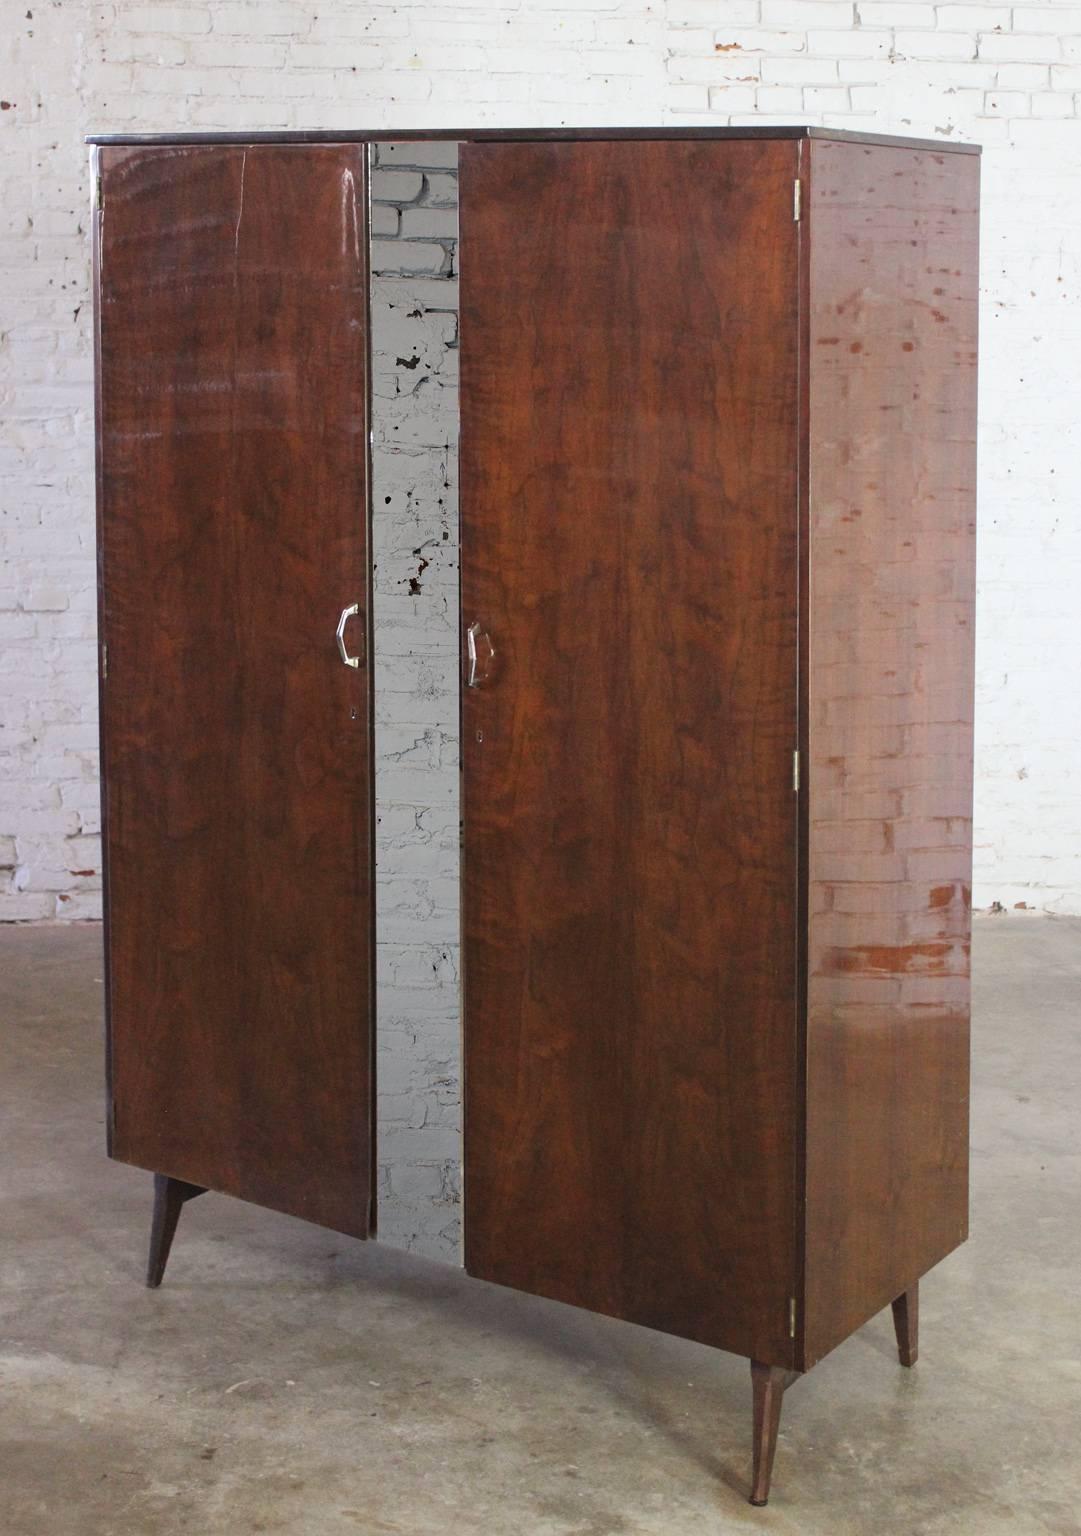 Very handsome wardrobe by Meredew Furniture manufacturers. Part of the tola bedroom furniture and Meredew Design 1962 line attributed to Alphons Loebenstein. It is in great vintage condition. See long description for details.

This wonderful